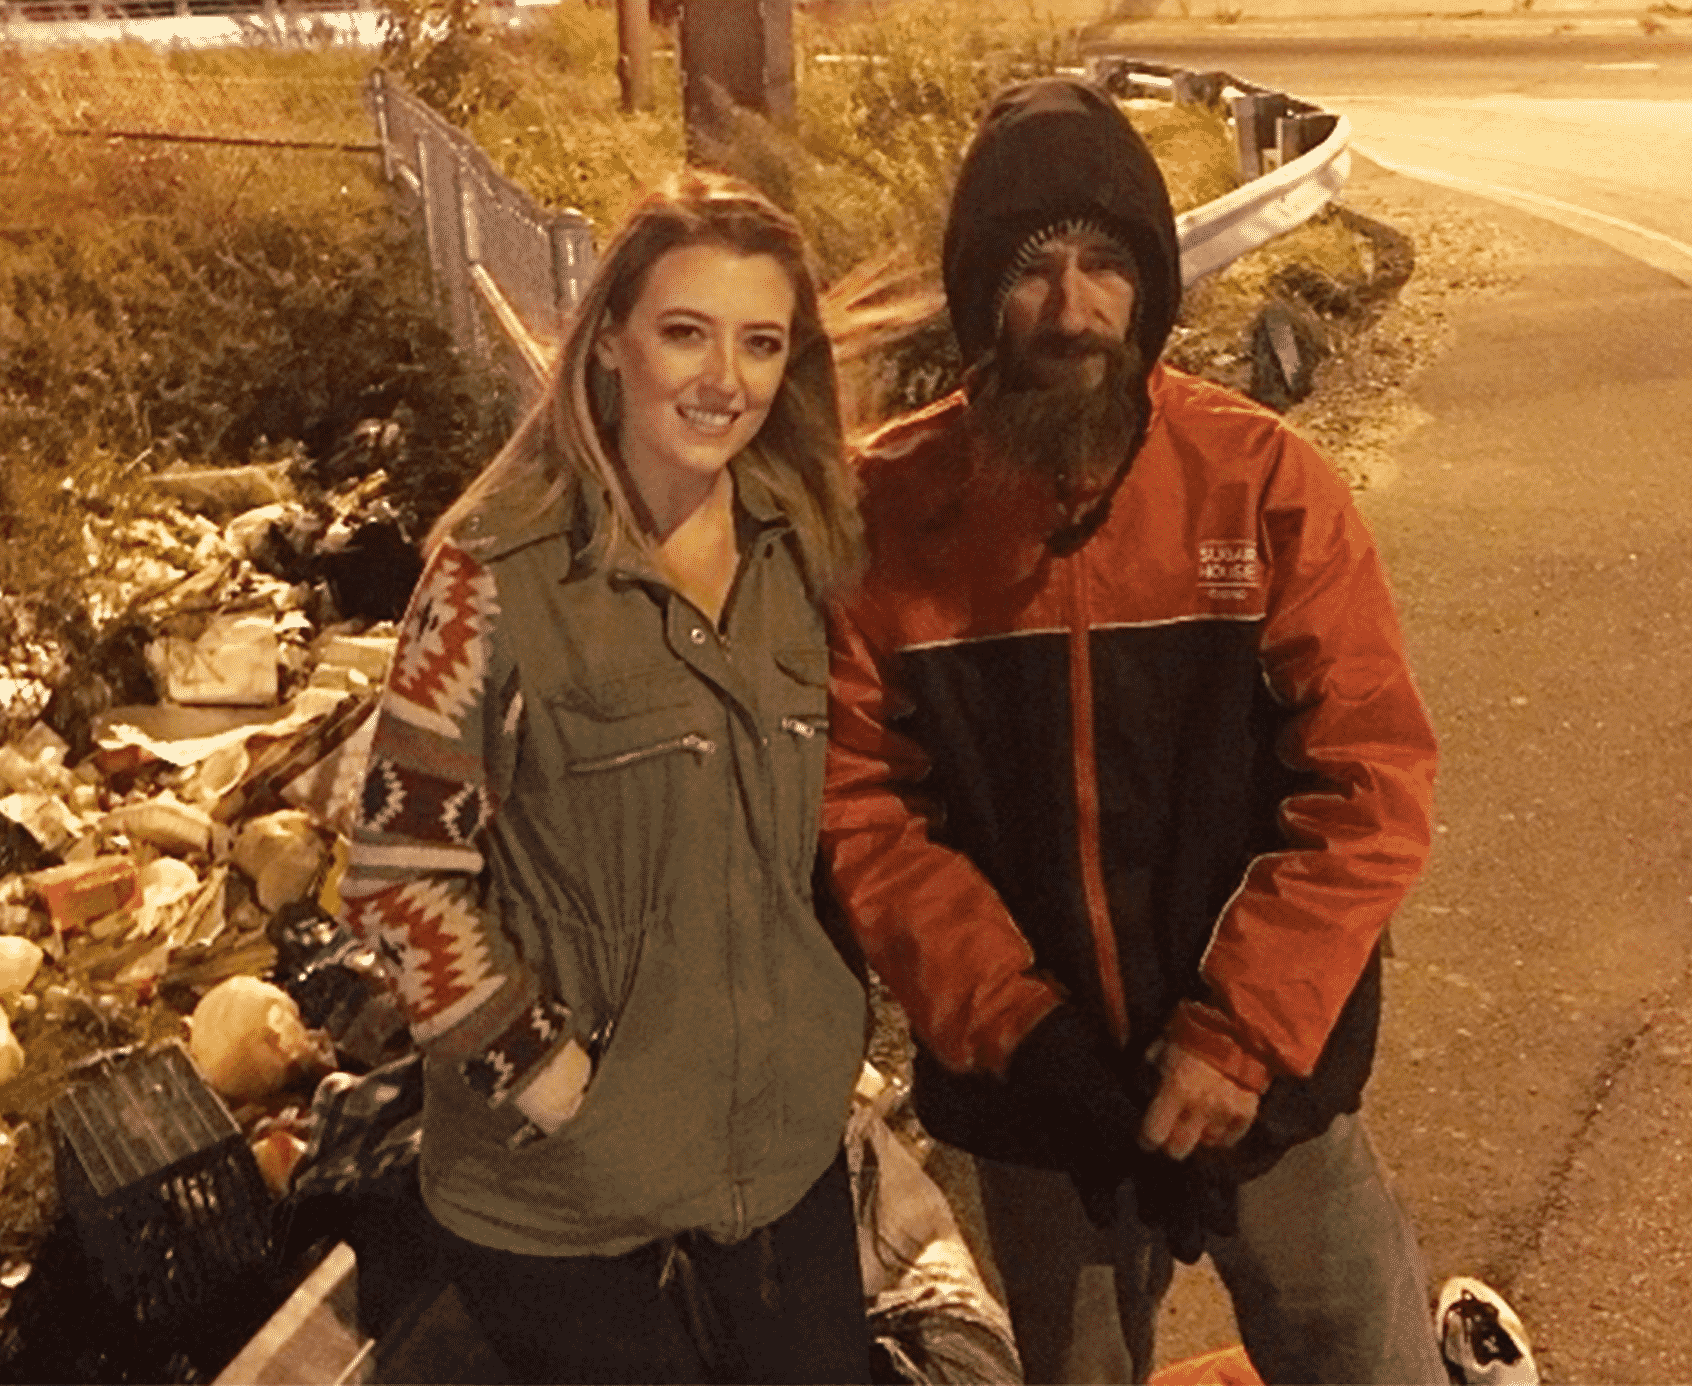 Woman raises over $365,000 for homeless veteran who kindly helped her